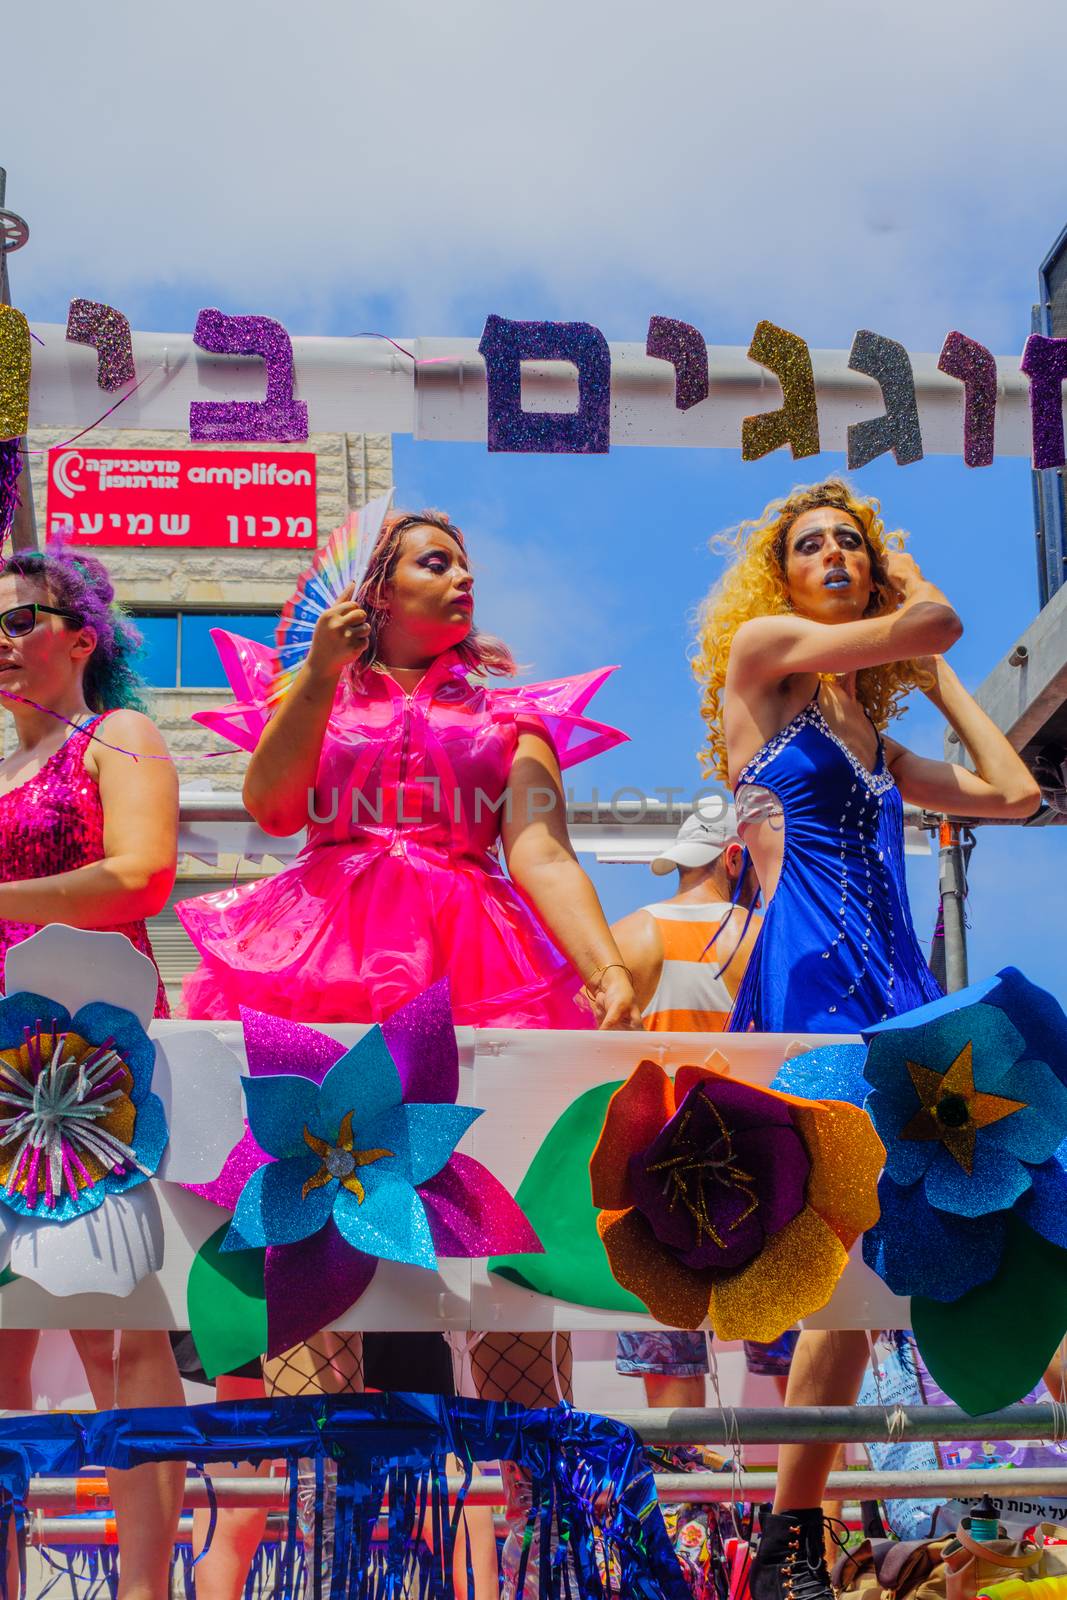 HAIFA, Israel - June 30, 2017: Dancers on a truck entertain the crowd during the annual pride parade of the LGBT community, in the streets of Haifa, Israel